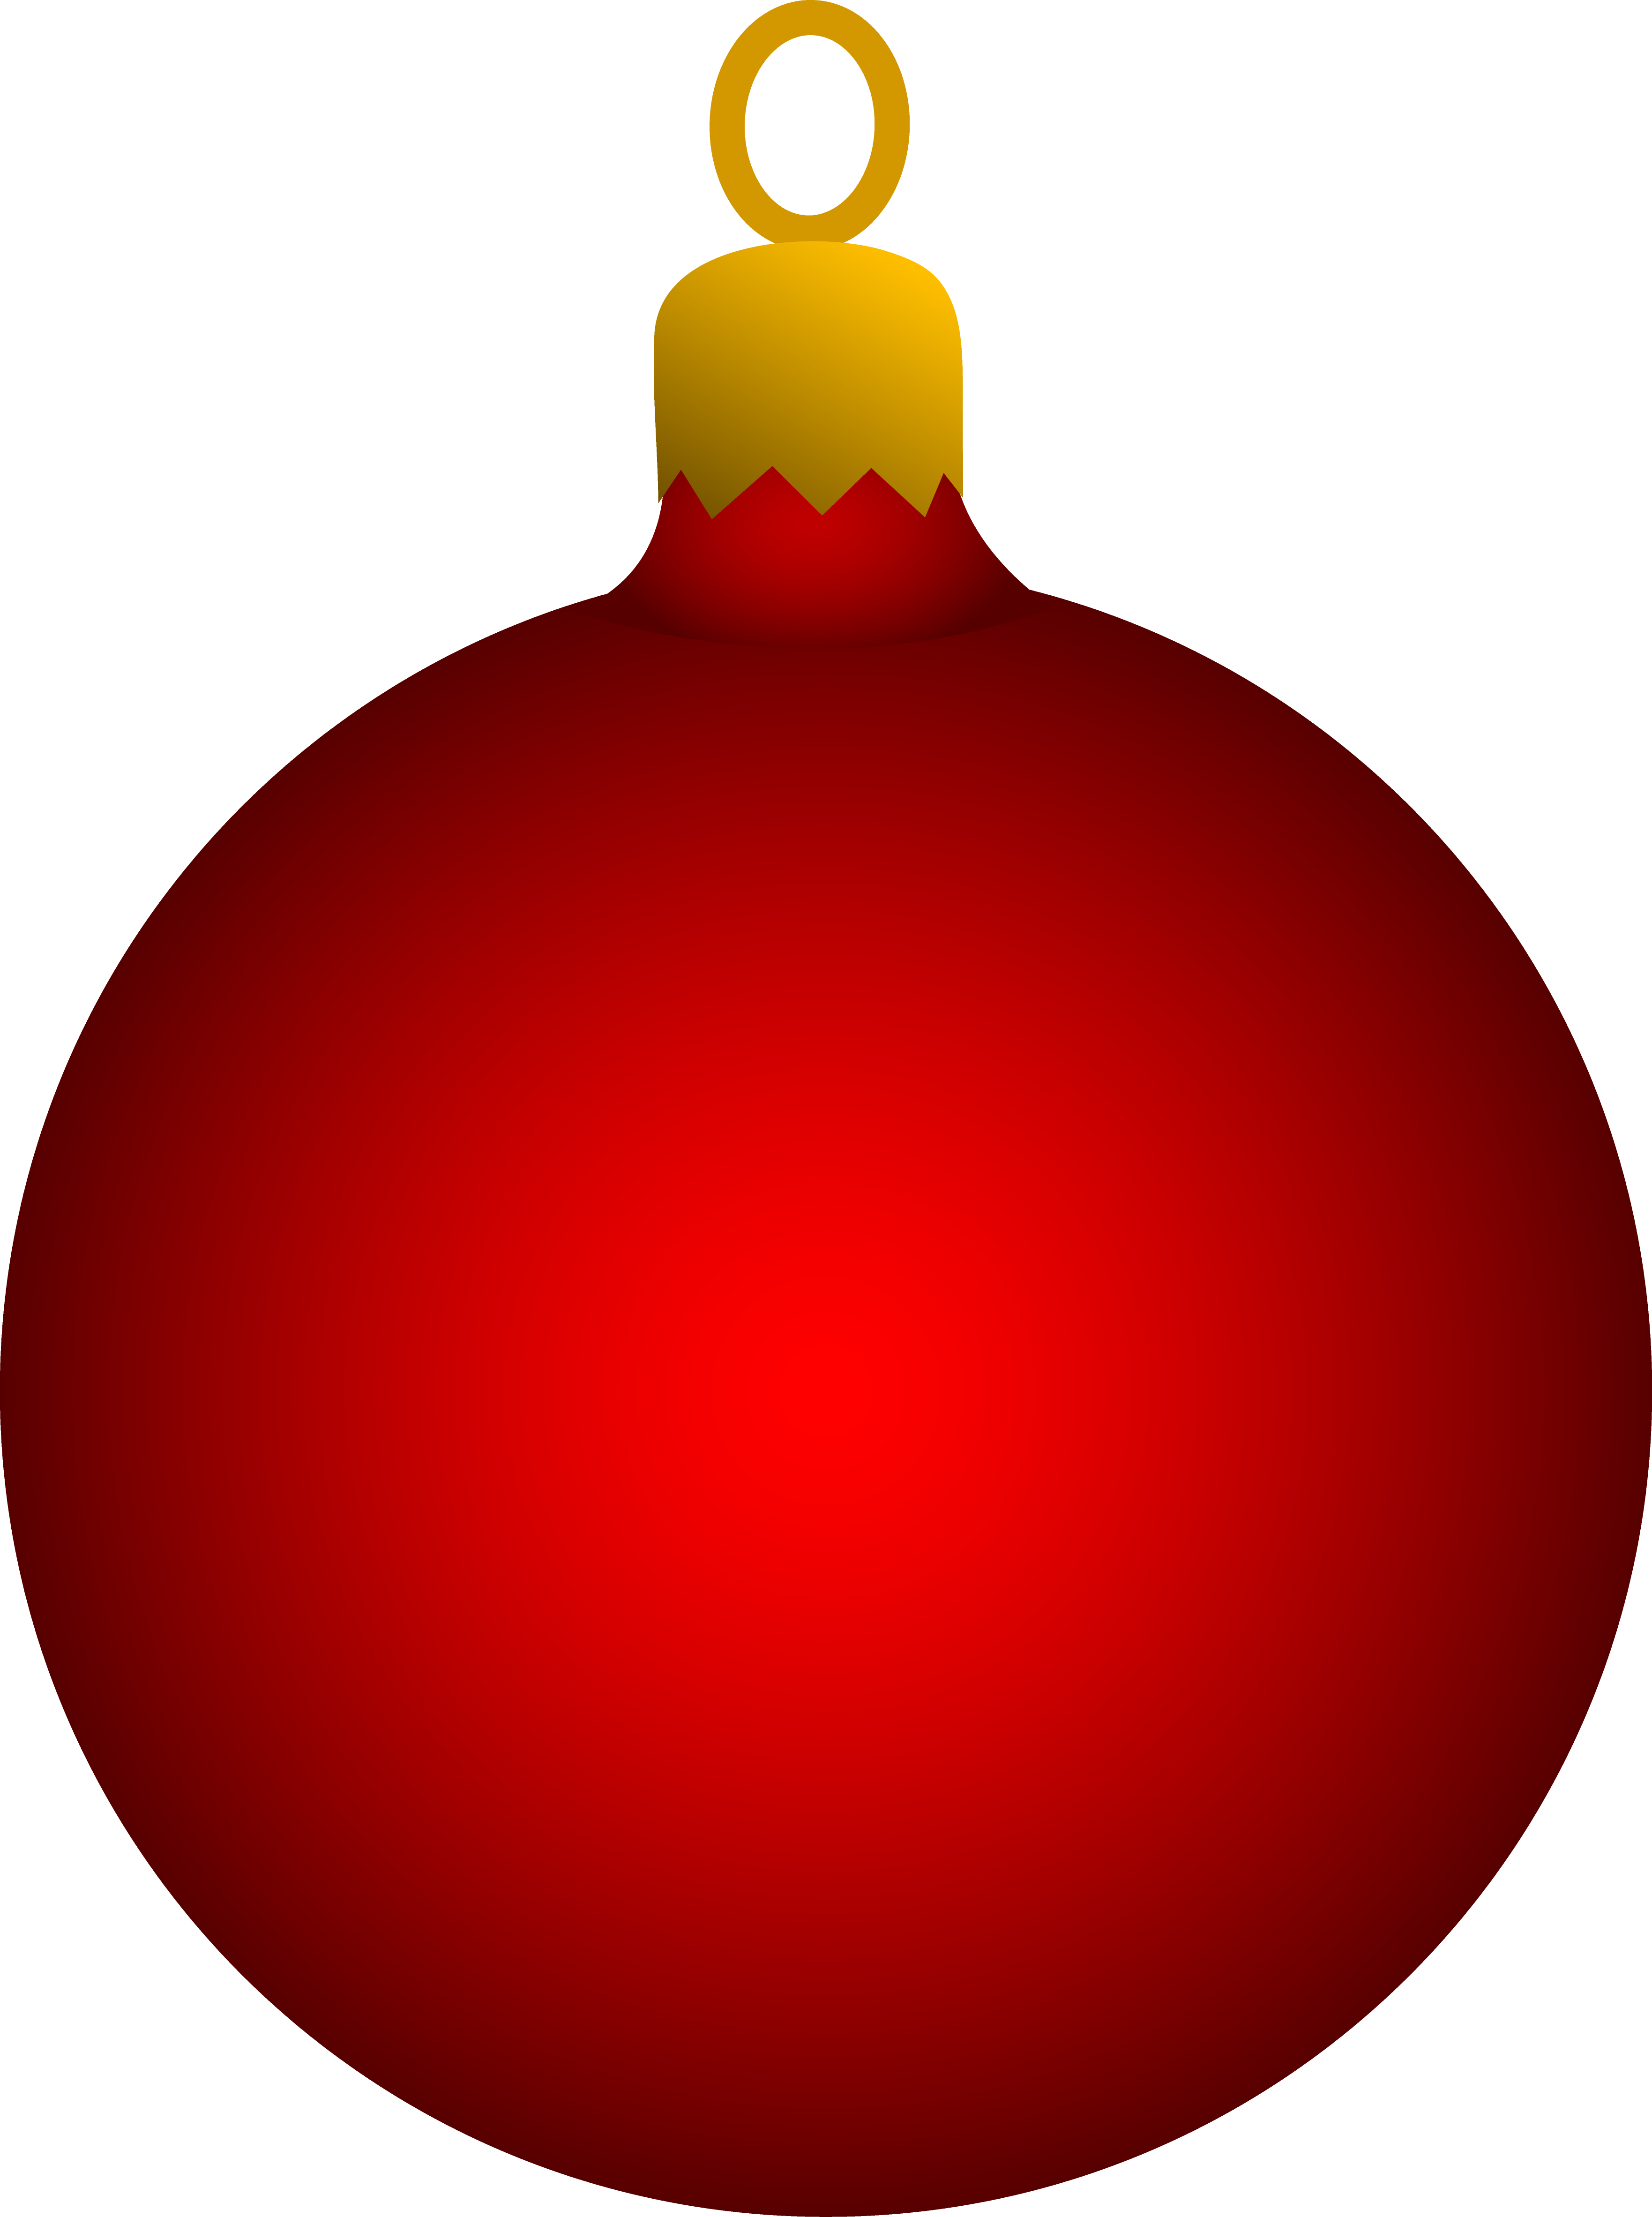 Artificial christmas trees ornaments. Submarine clipart red